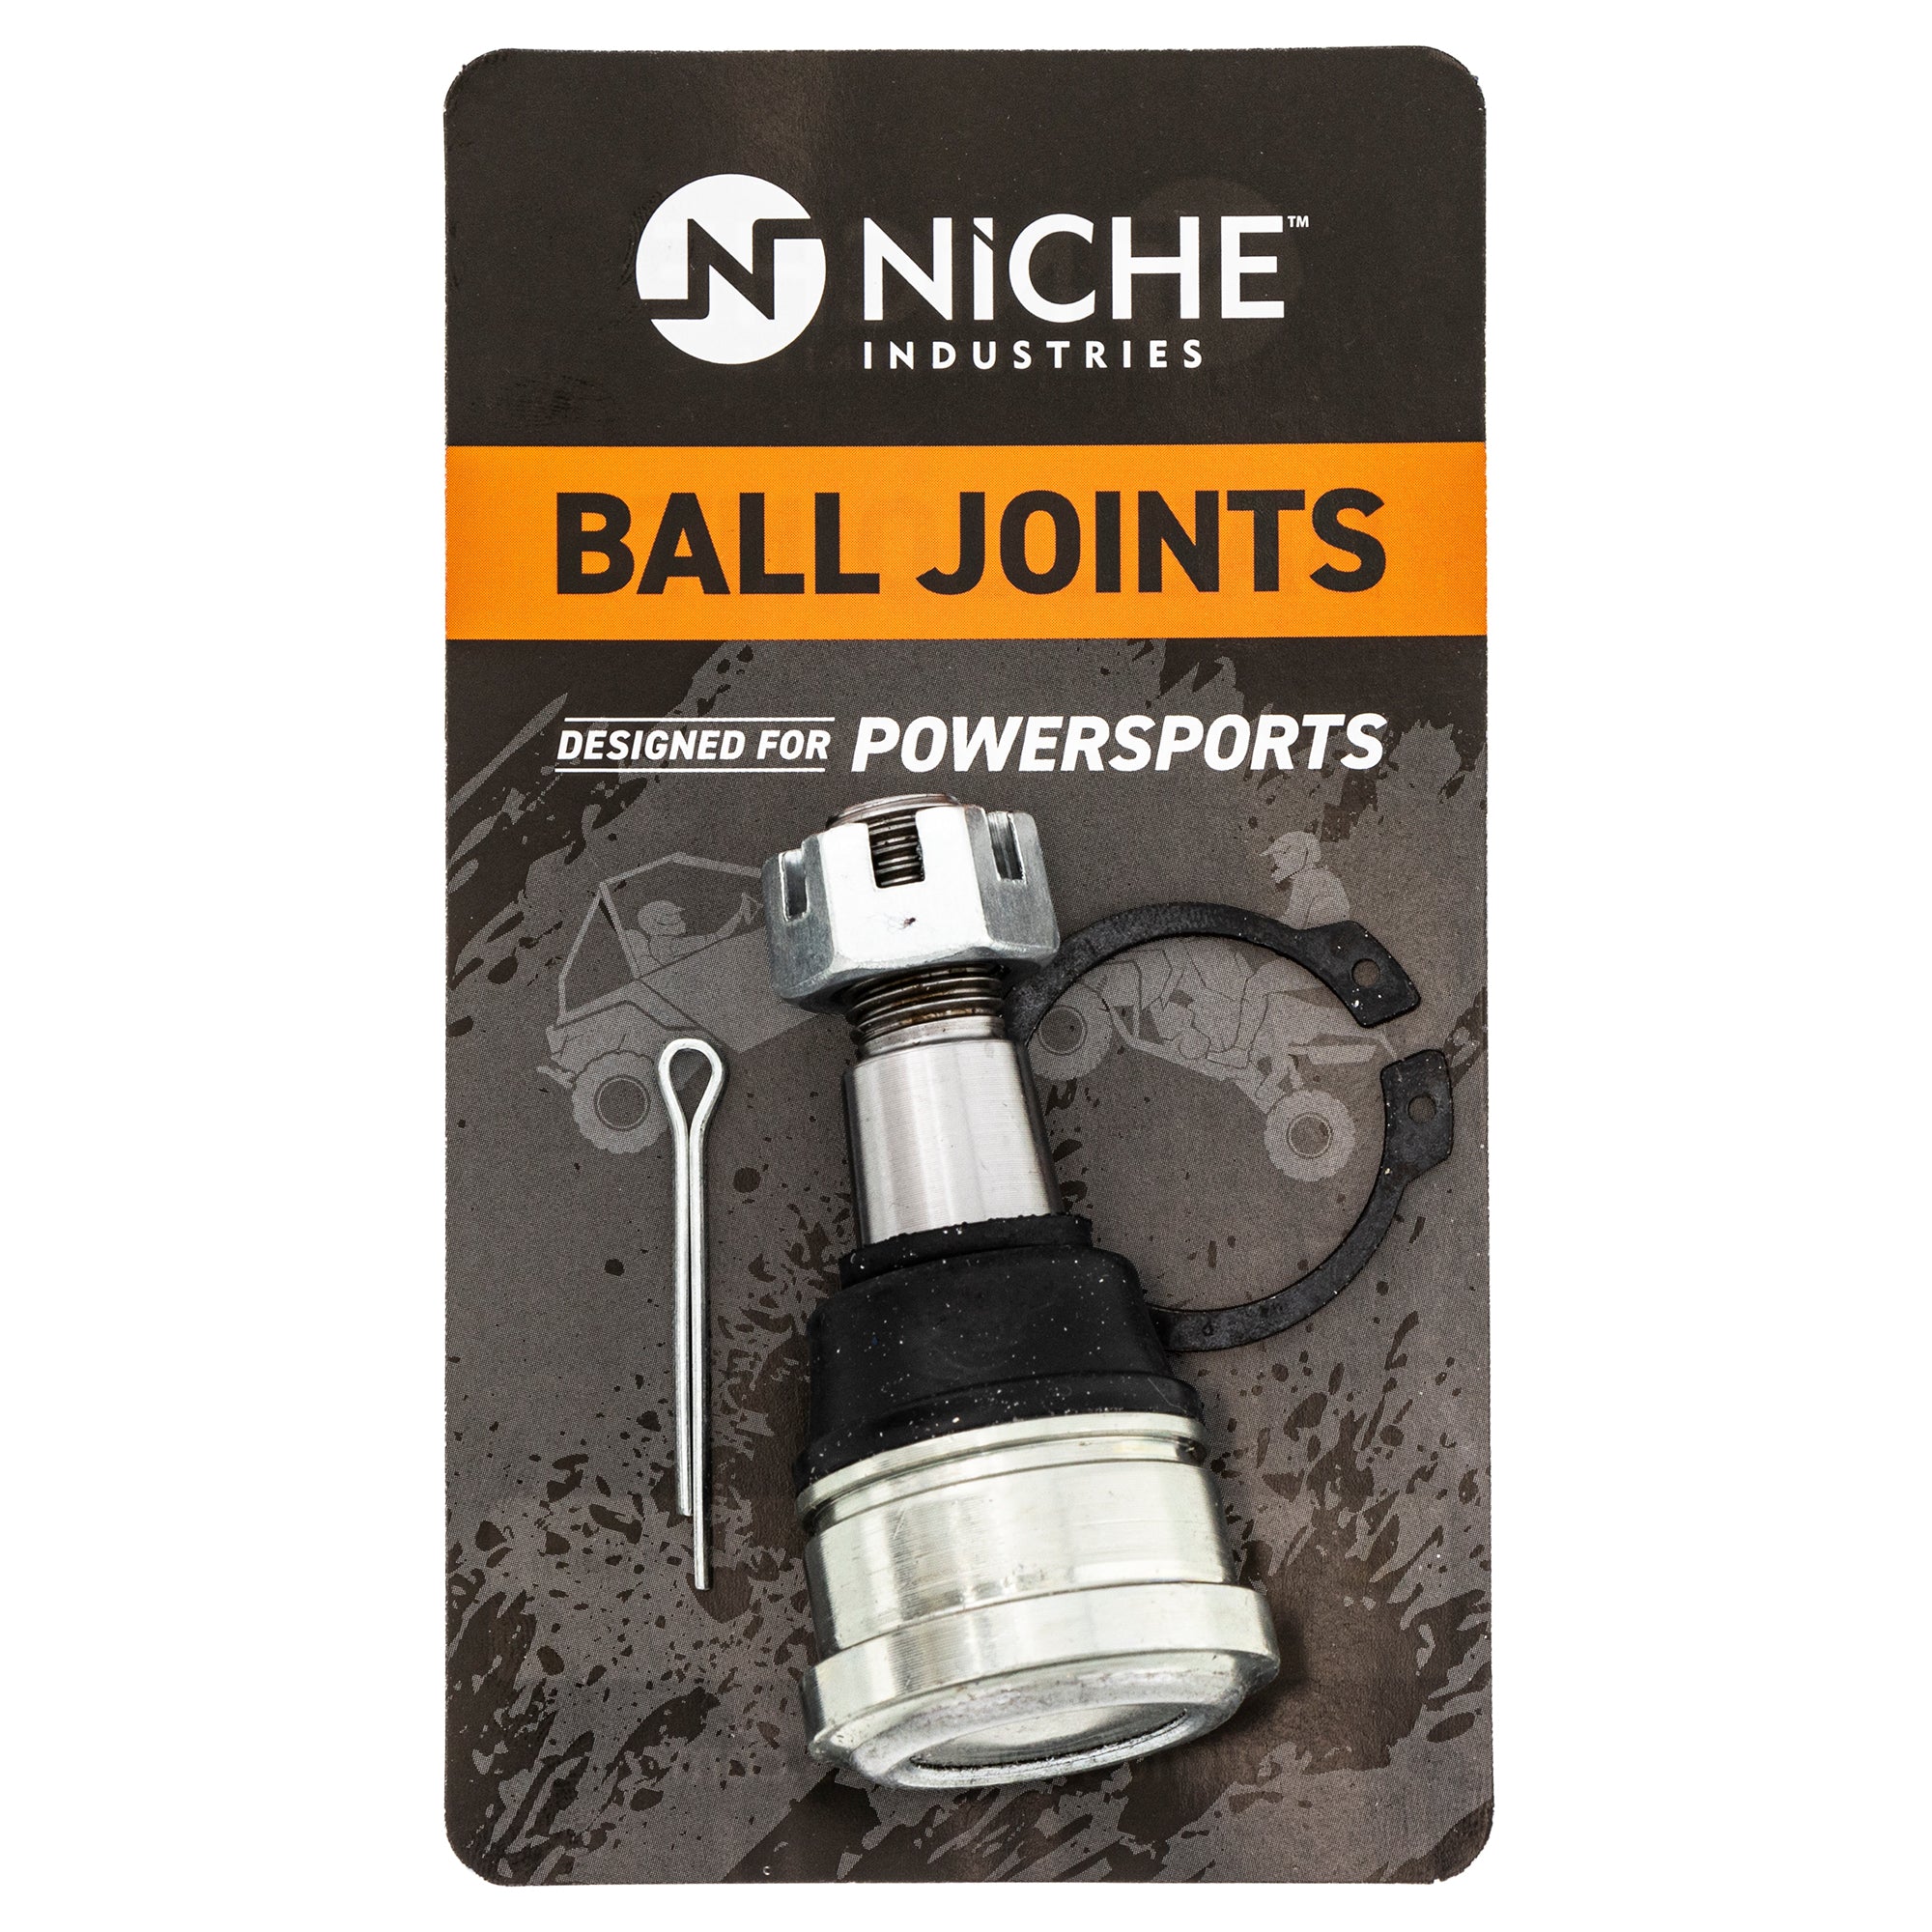 NICHE 519-CBJ2247T Ball Joint 4-Pack for Western Power Sports Polaris